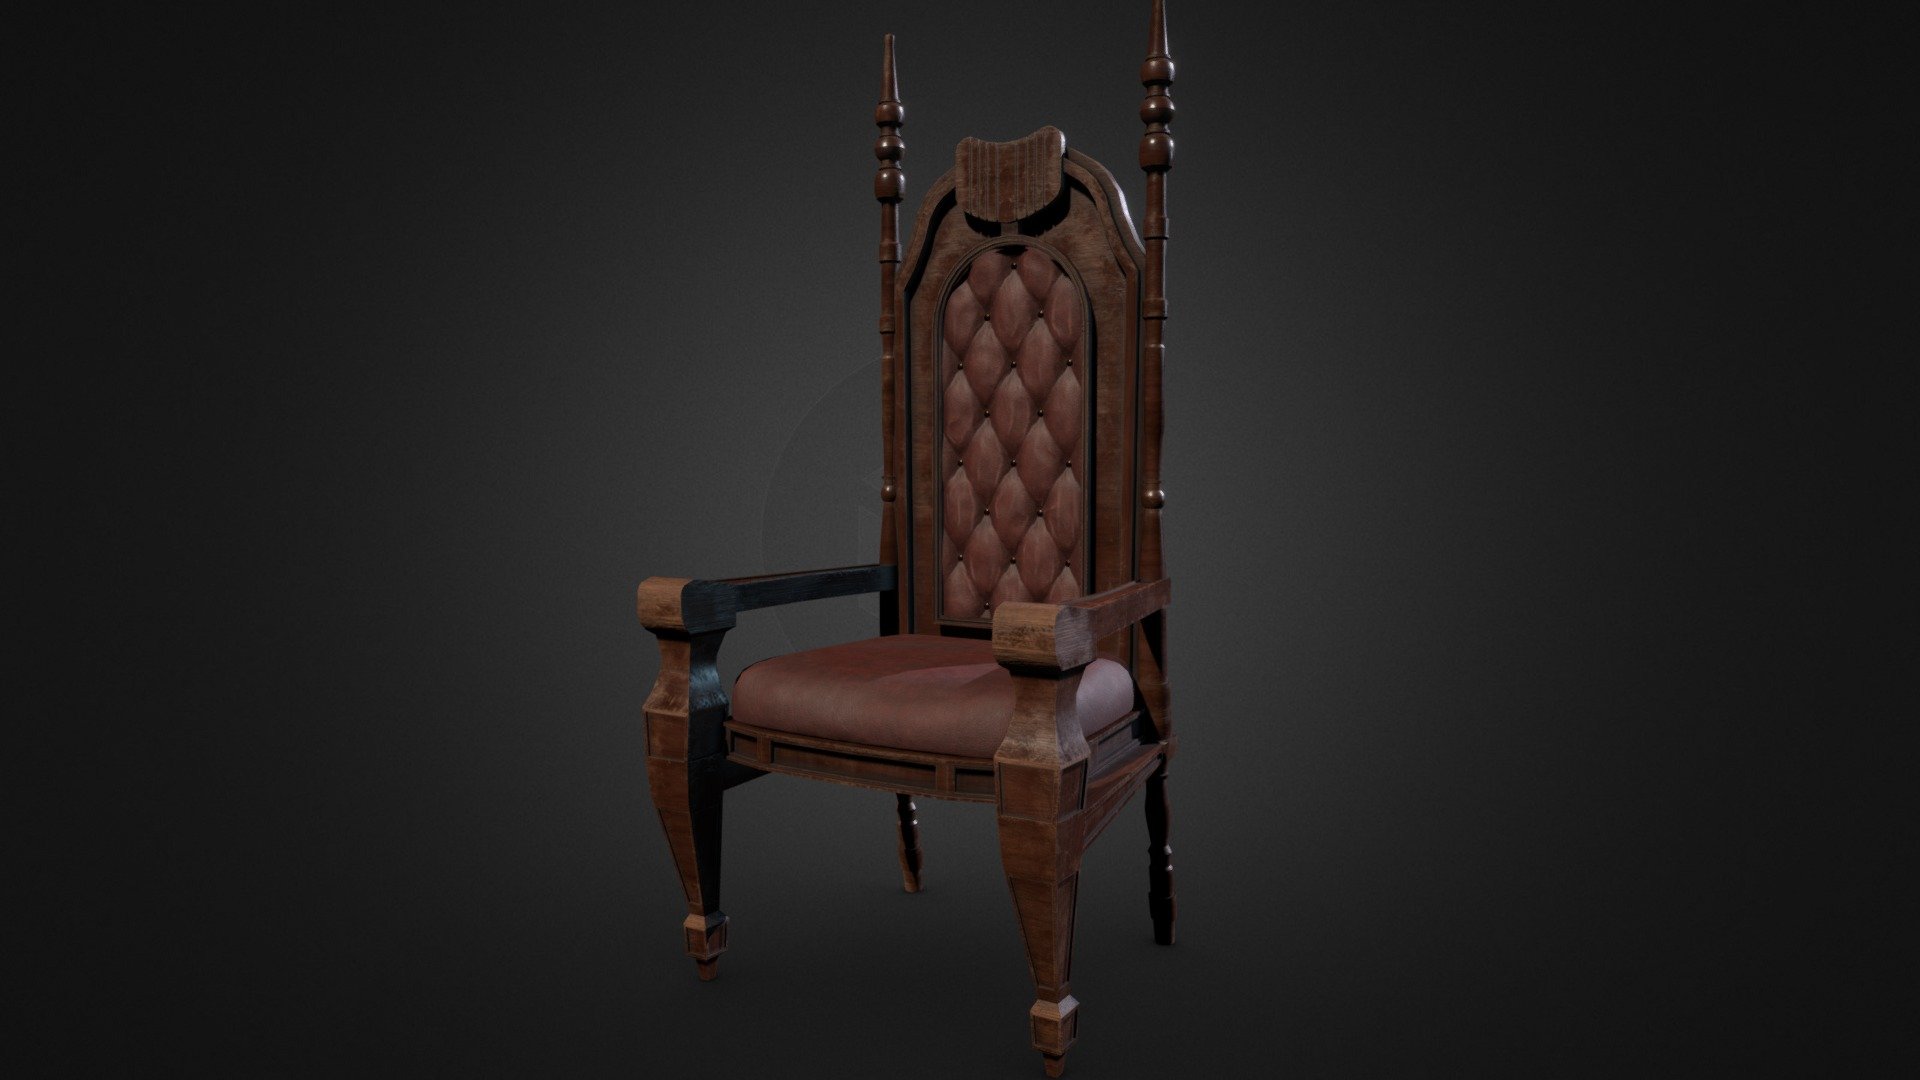 This is a big chair 3d model made for old environments with wooden decorations - Big Wooden Chair 3D Model - 3D model by IPfuentes 3d model